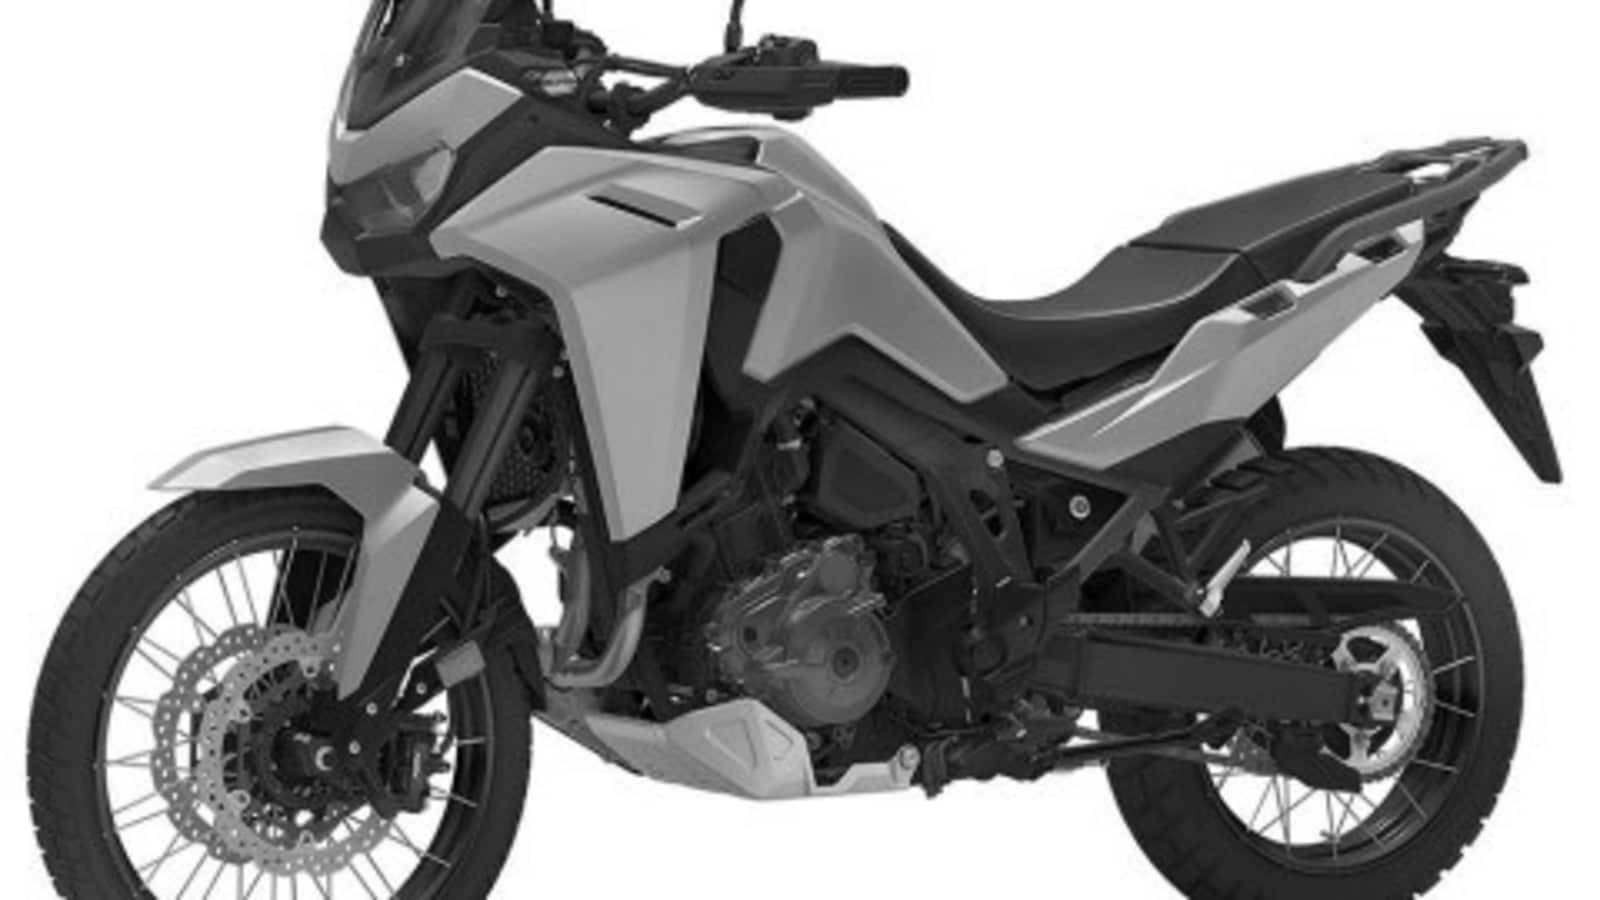 2024 Honda Africa Twin design patent filed. Check what's different